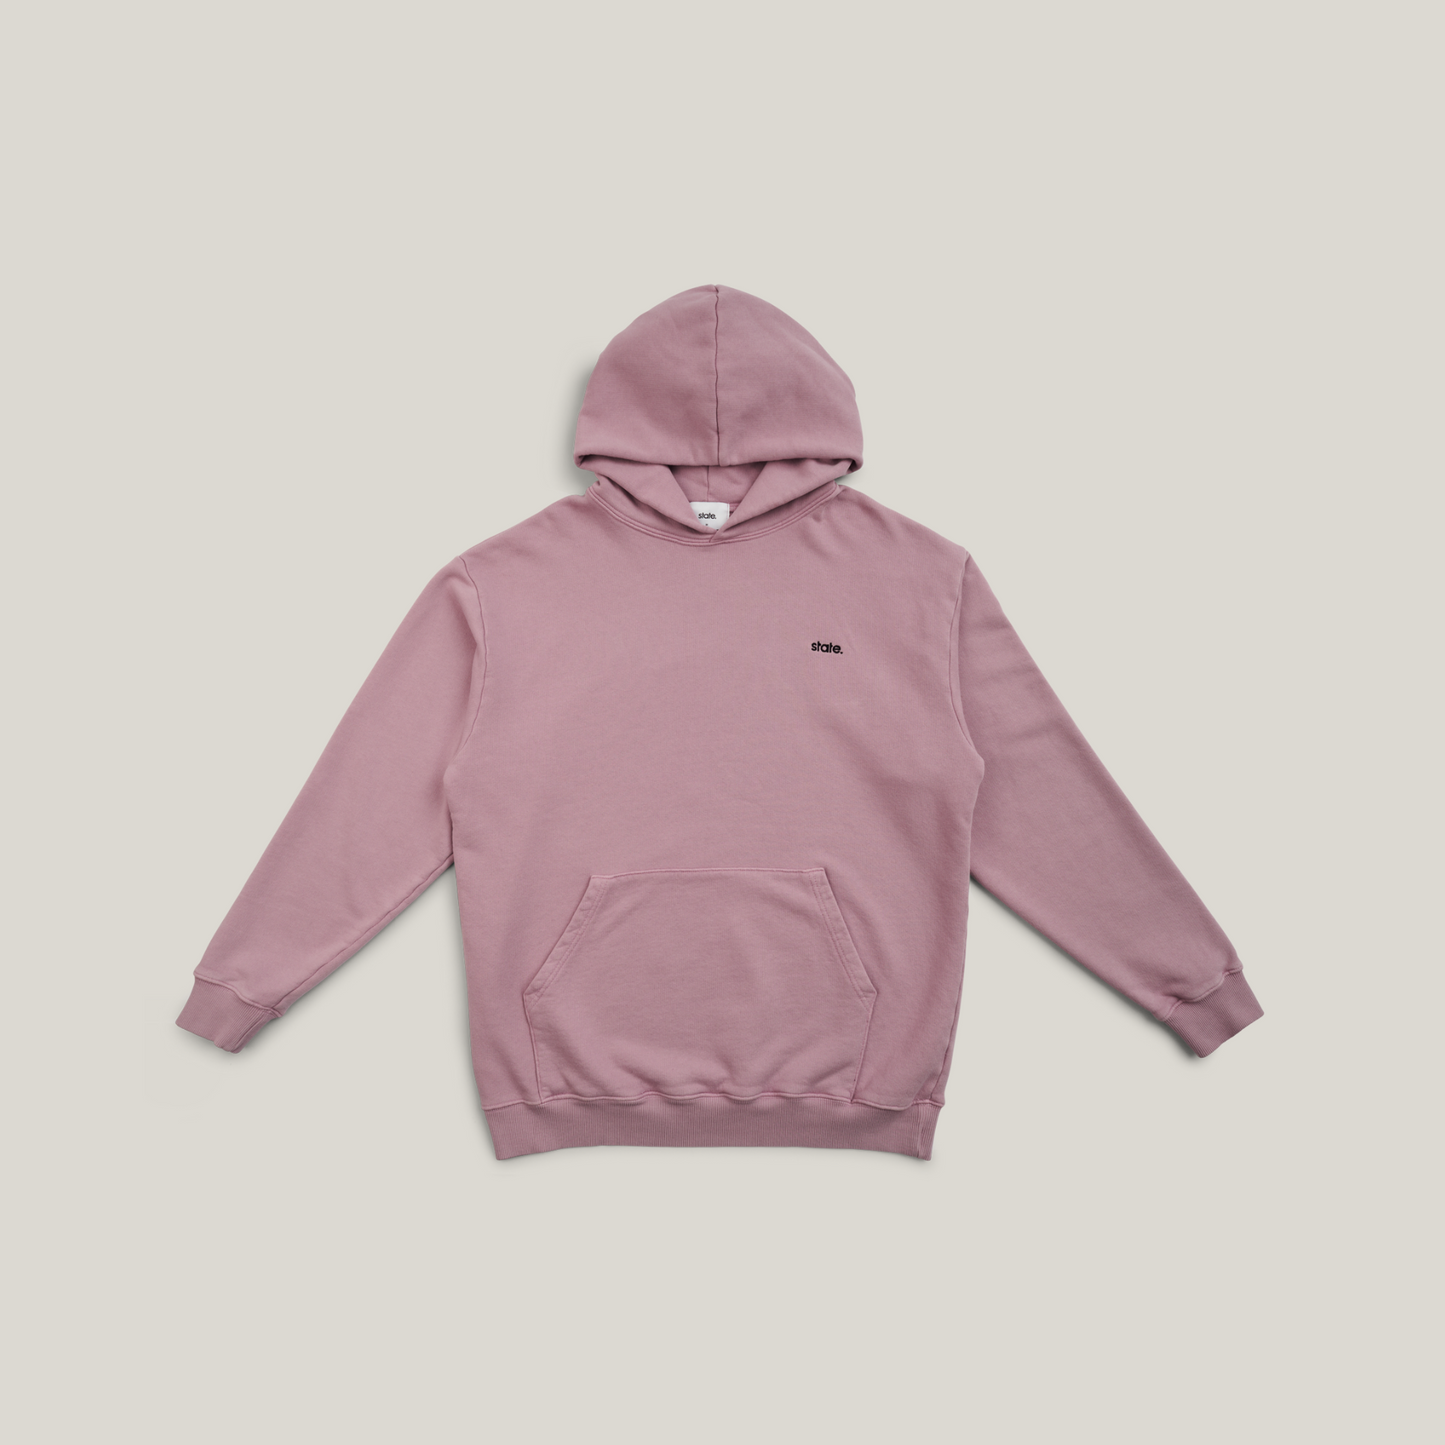 Load image into Gallery viewer, State logo hoodie - Rose pink (washed)
